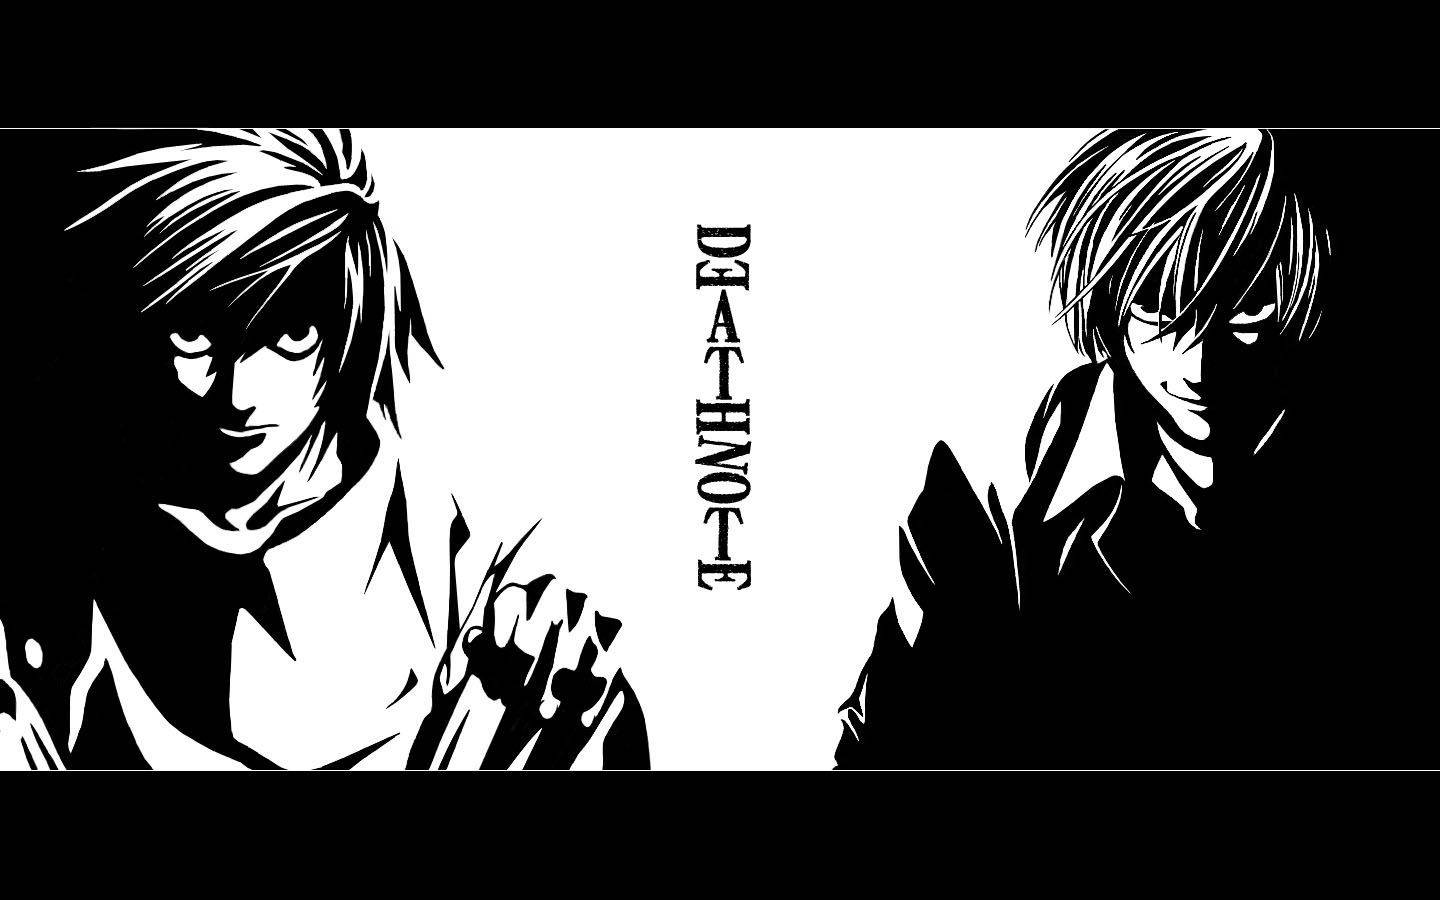 "Write the Name of a Criminal in the Death Note and their Death Shall be Decreed" Wallpaper